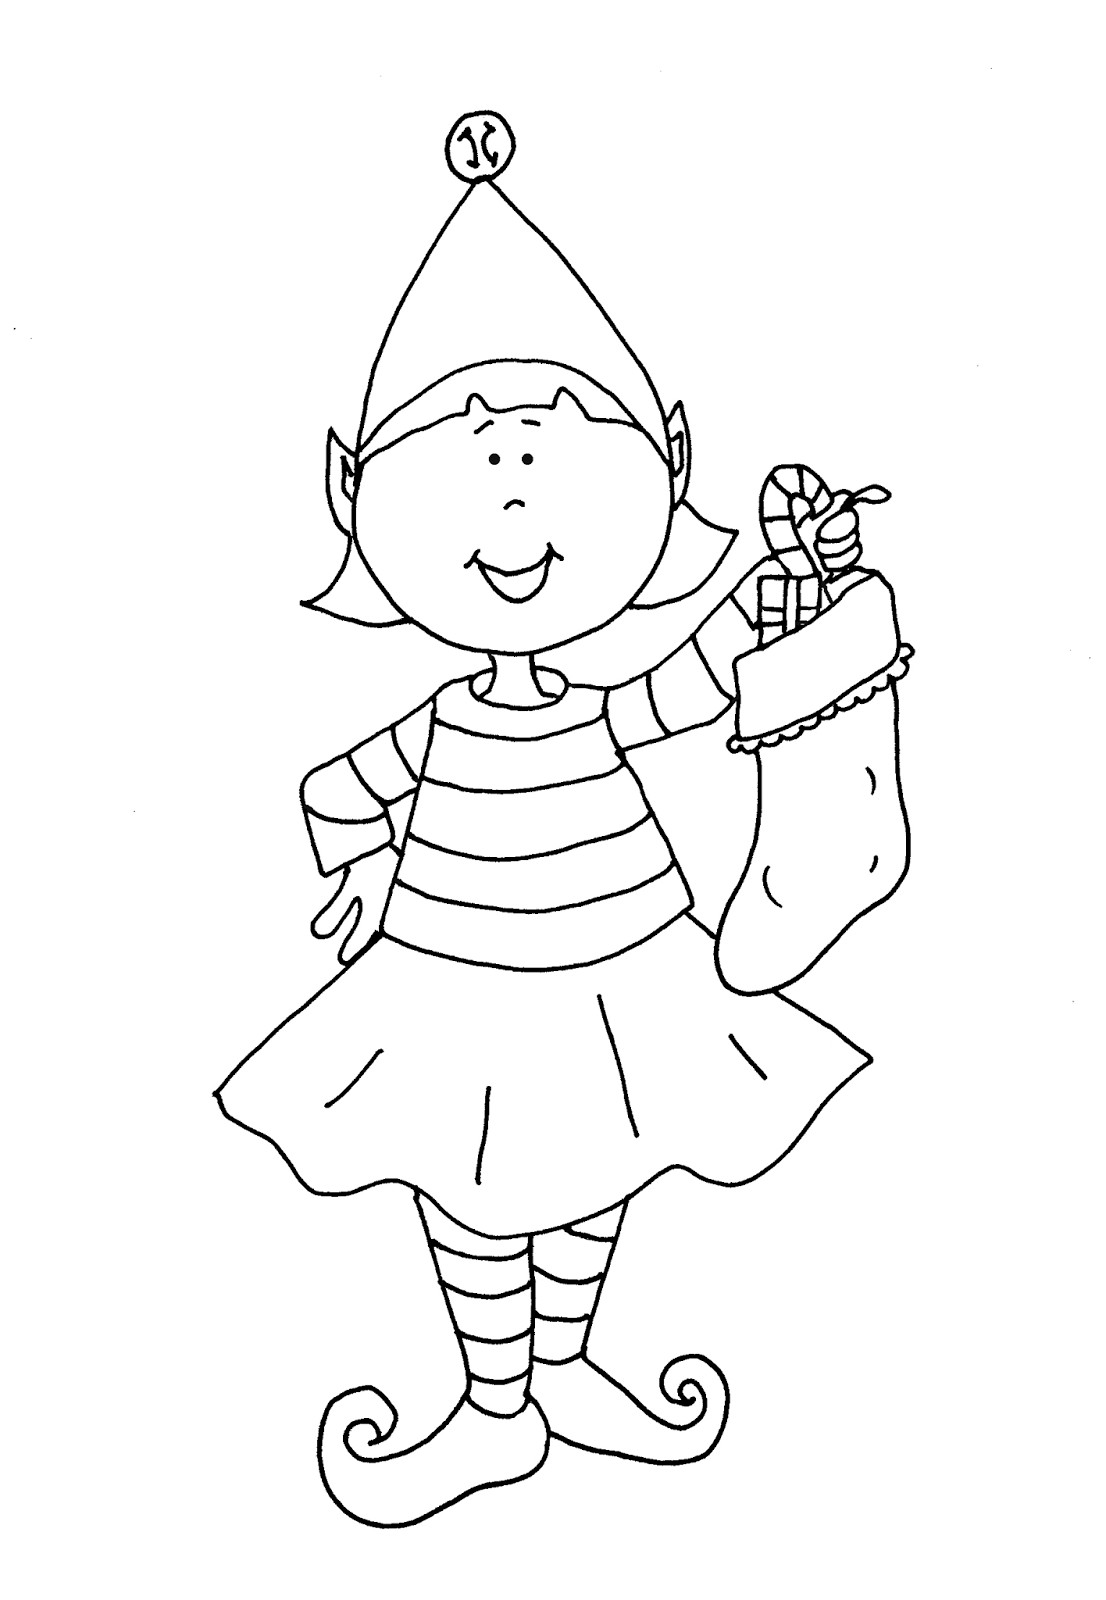 Elf Coloring Pages Printable
 Free Dearie Dolls Digi Stamps Elf Girl